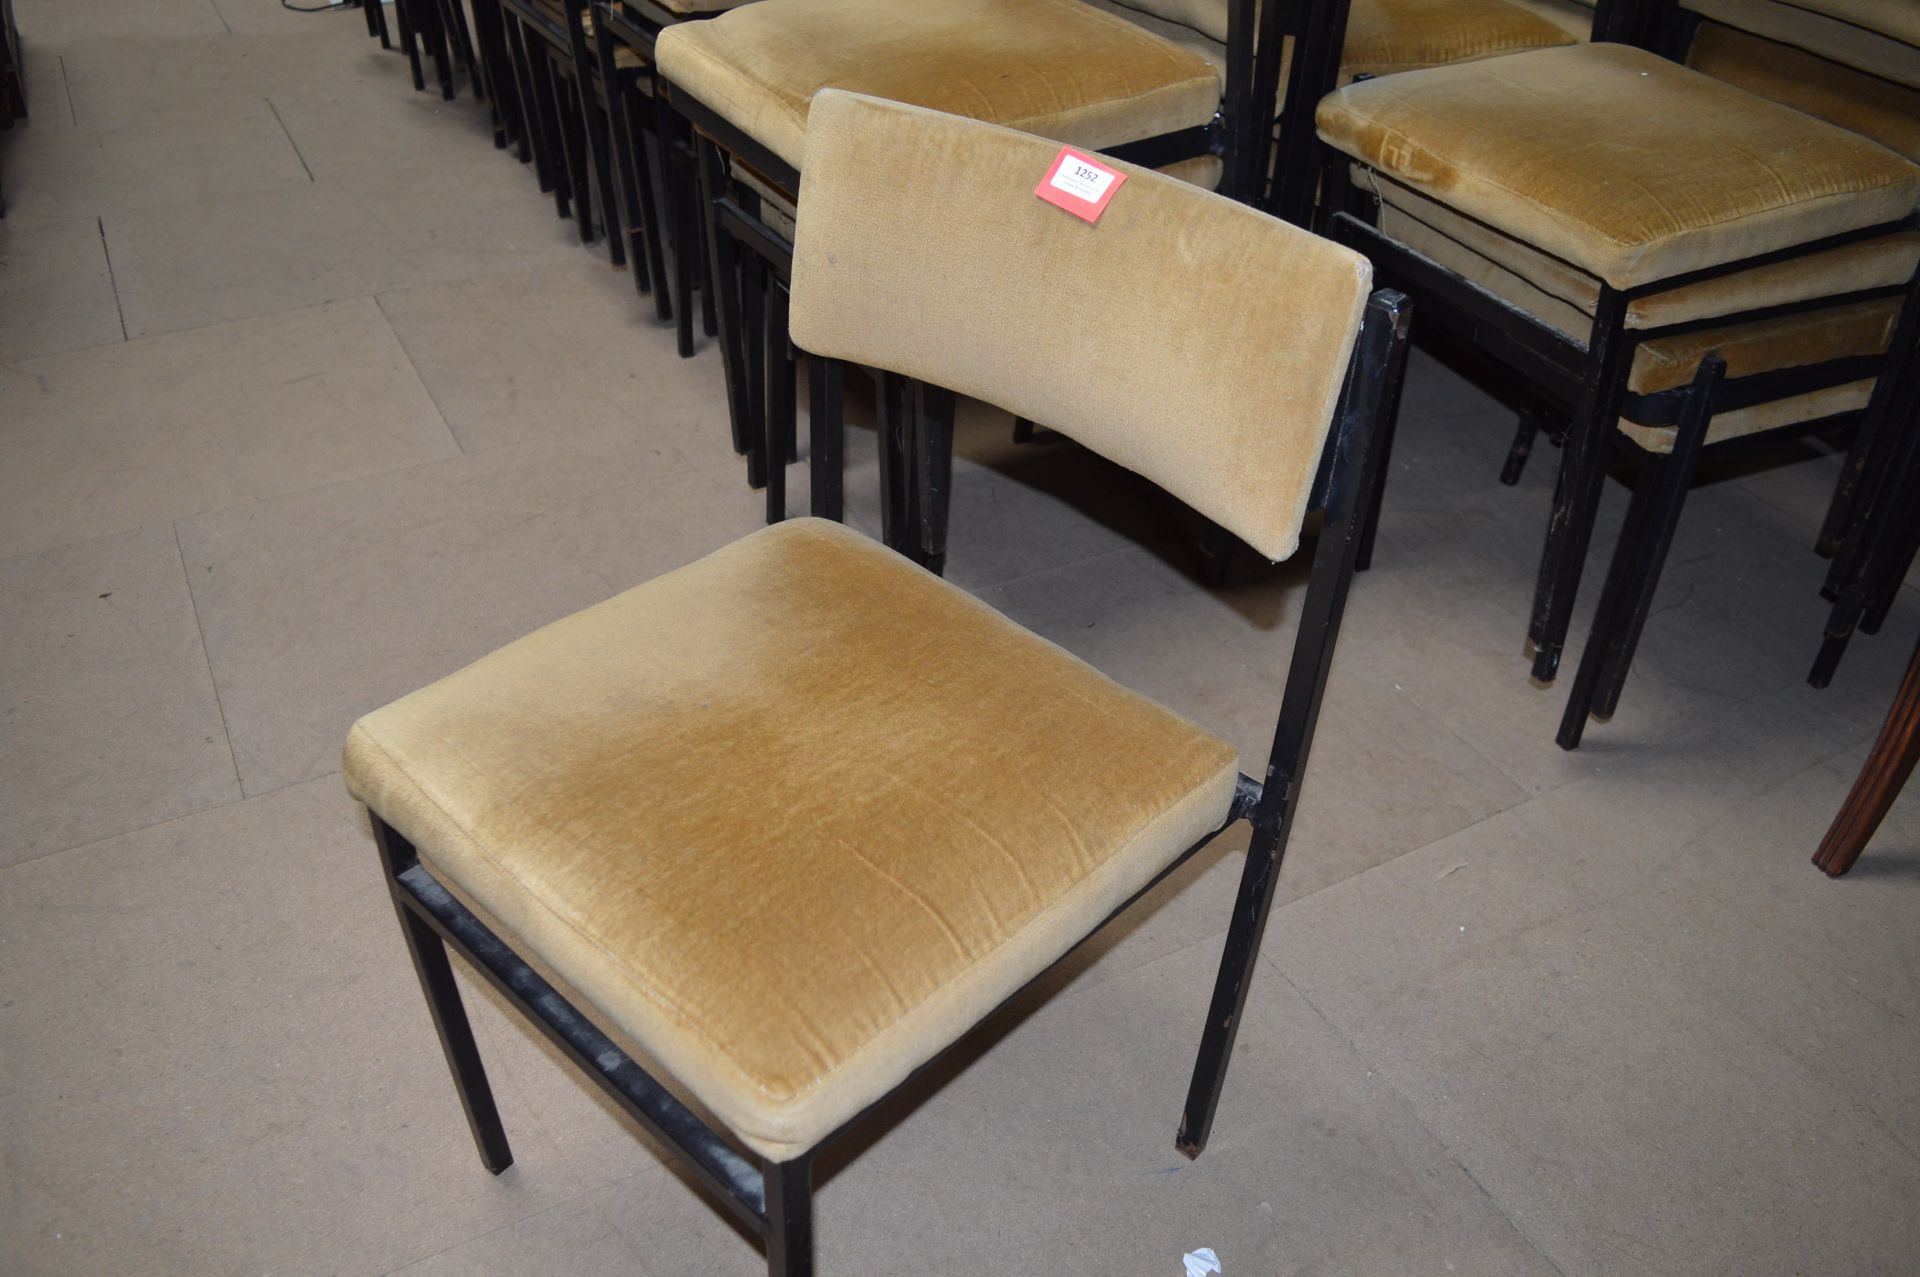 75+ Steel Framed Stackable Chairs with Upholstered Seats & Backs - Image 2 of 2